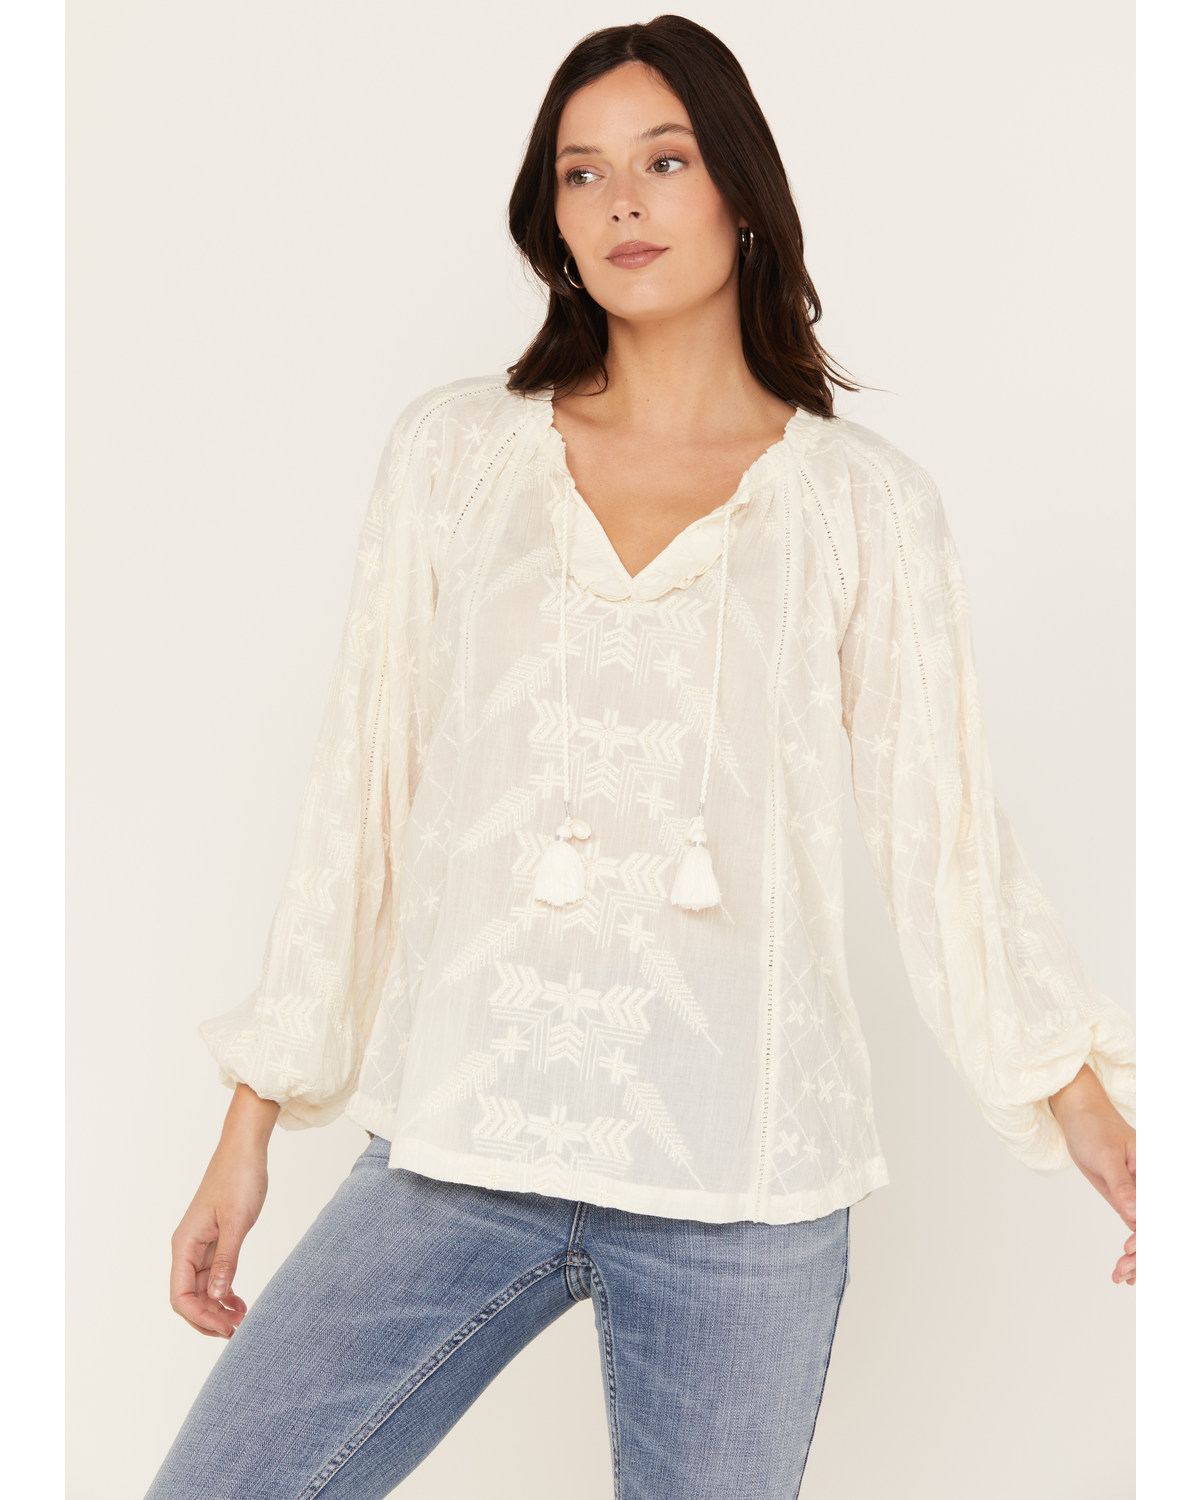 Shyanne Women's Long Sleeve Embroidered Boho Blouse